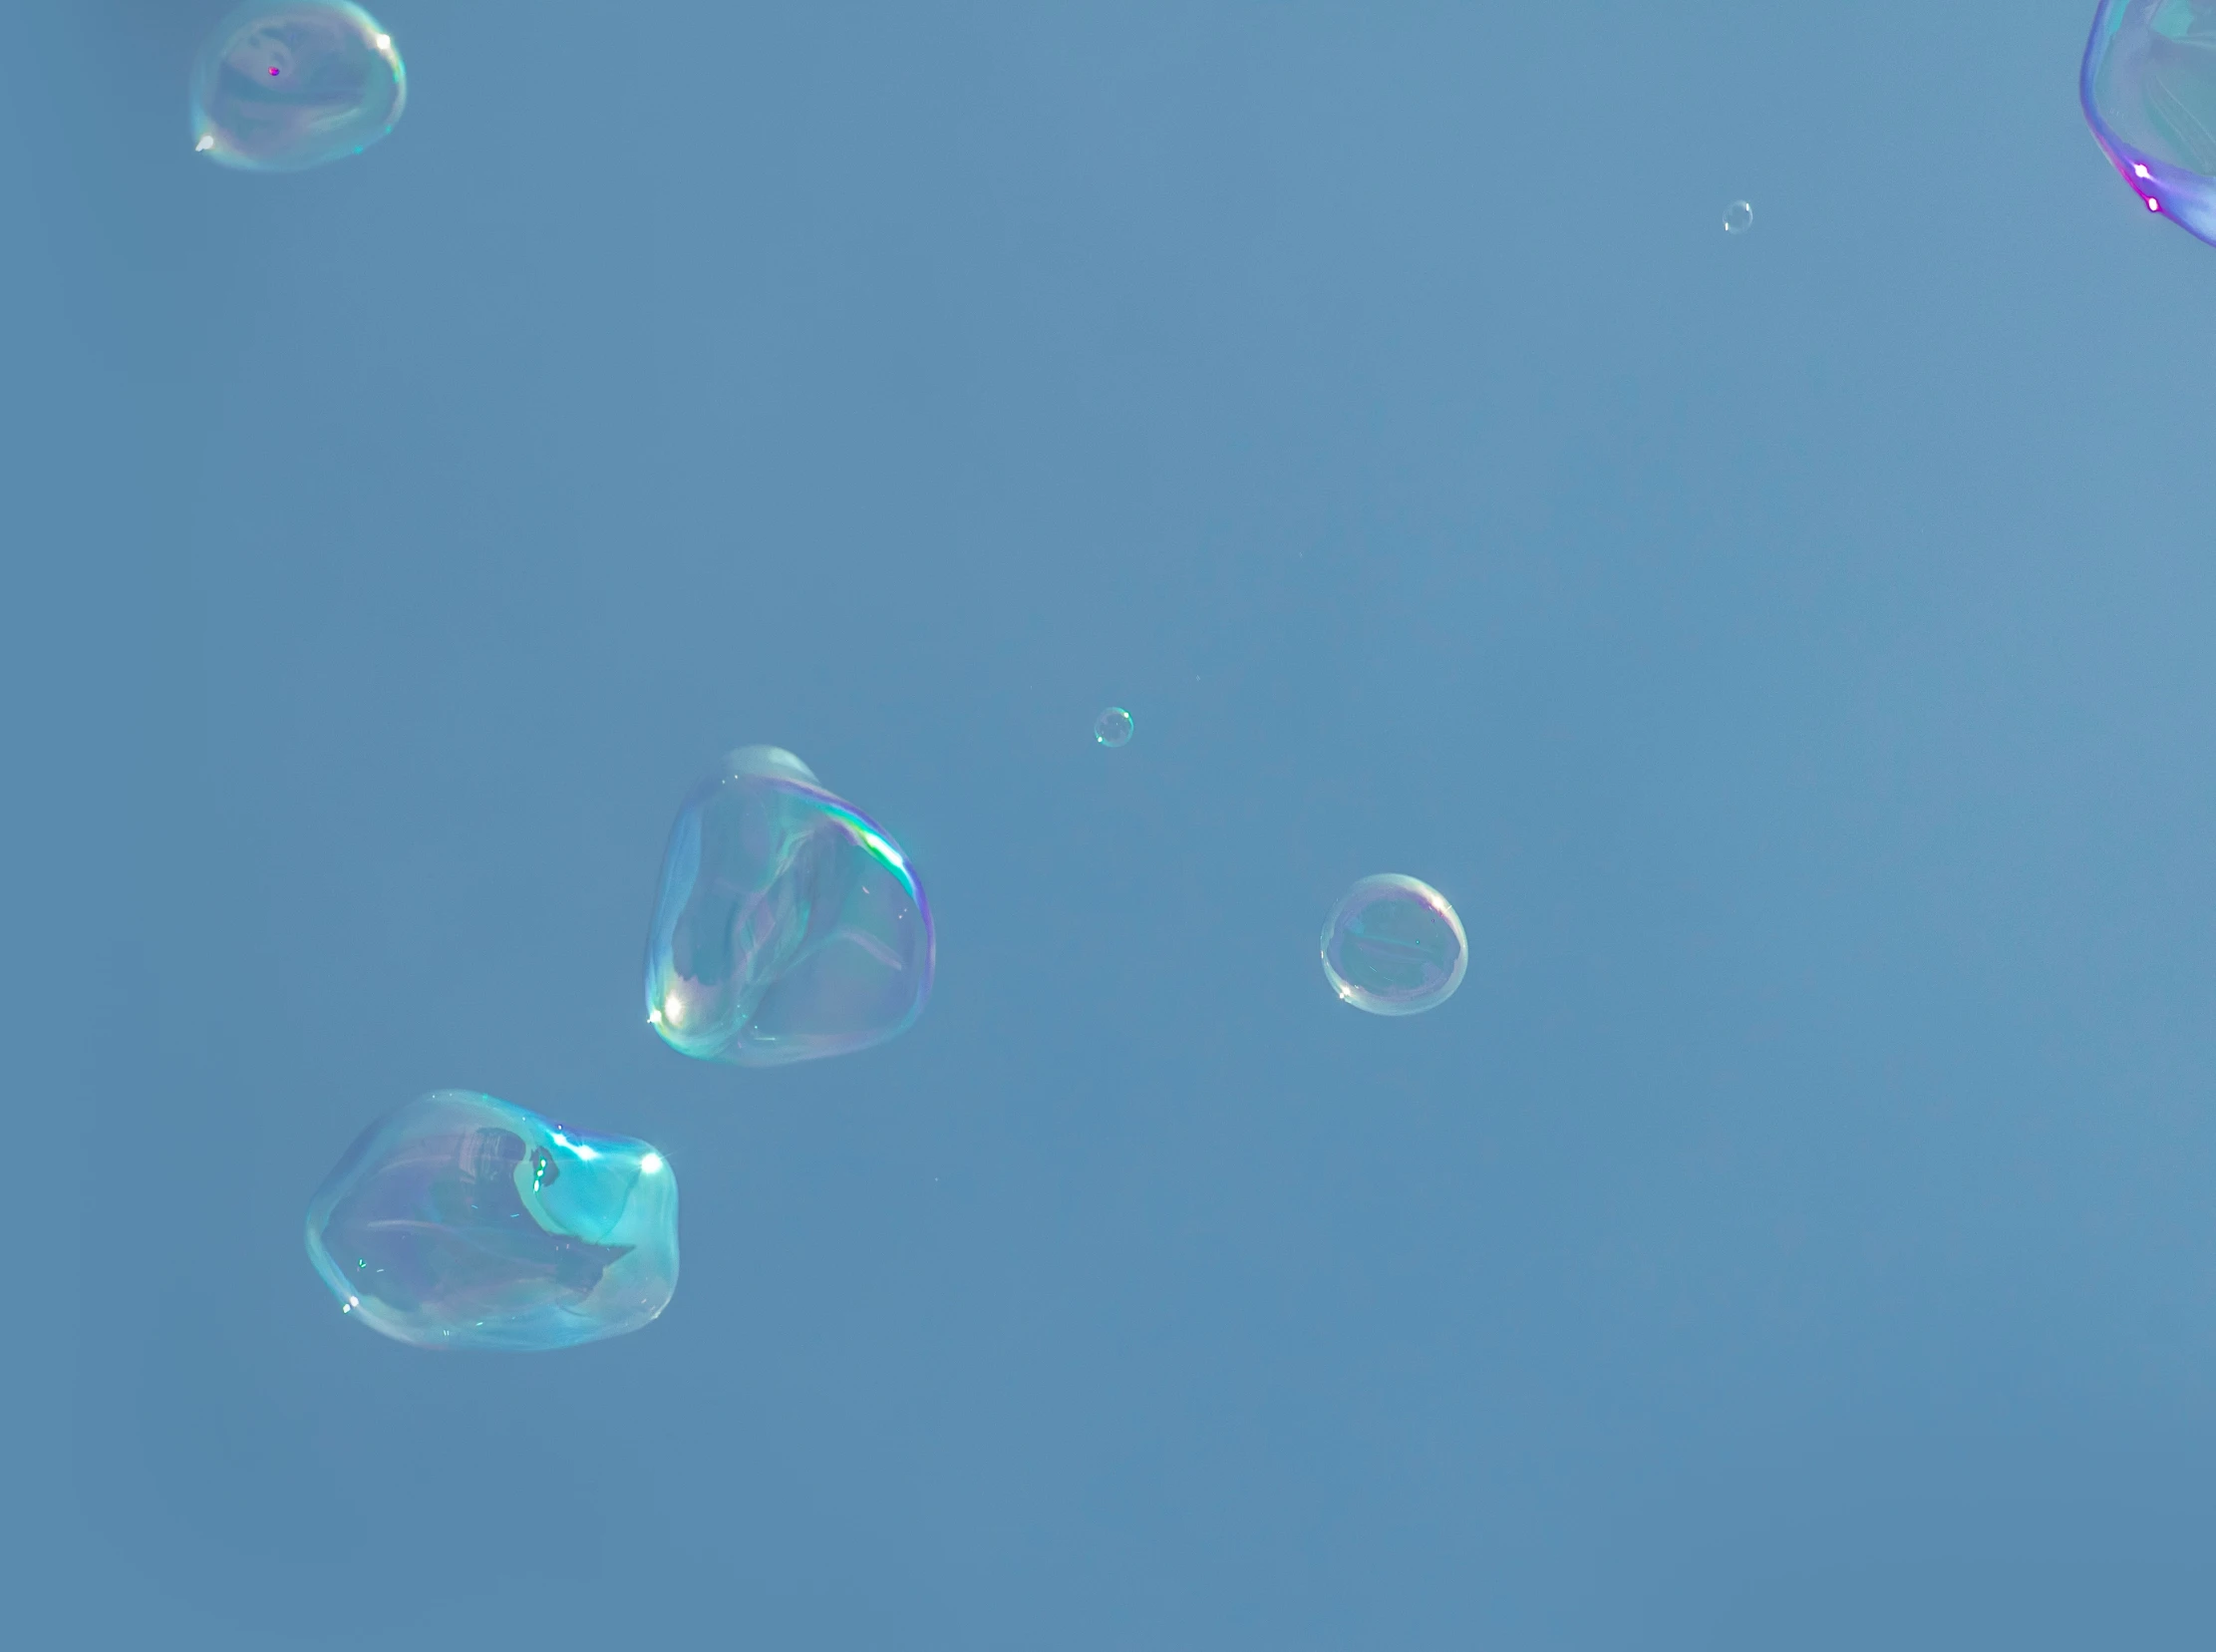 three soap bubbles floating in the air against a blue sky